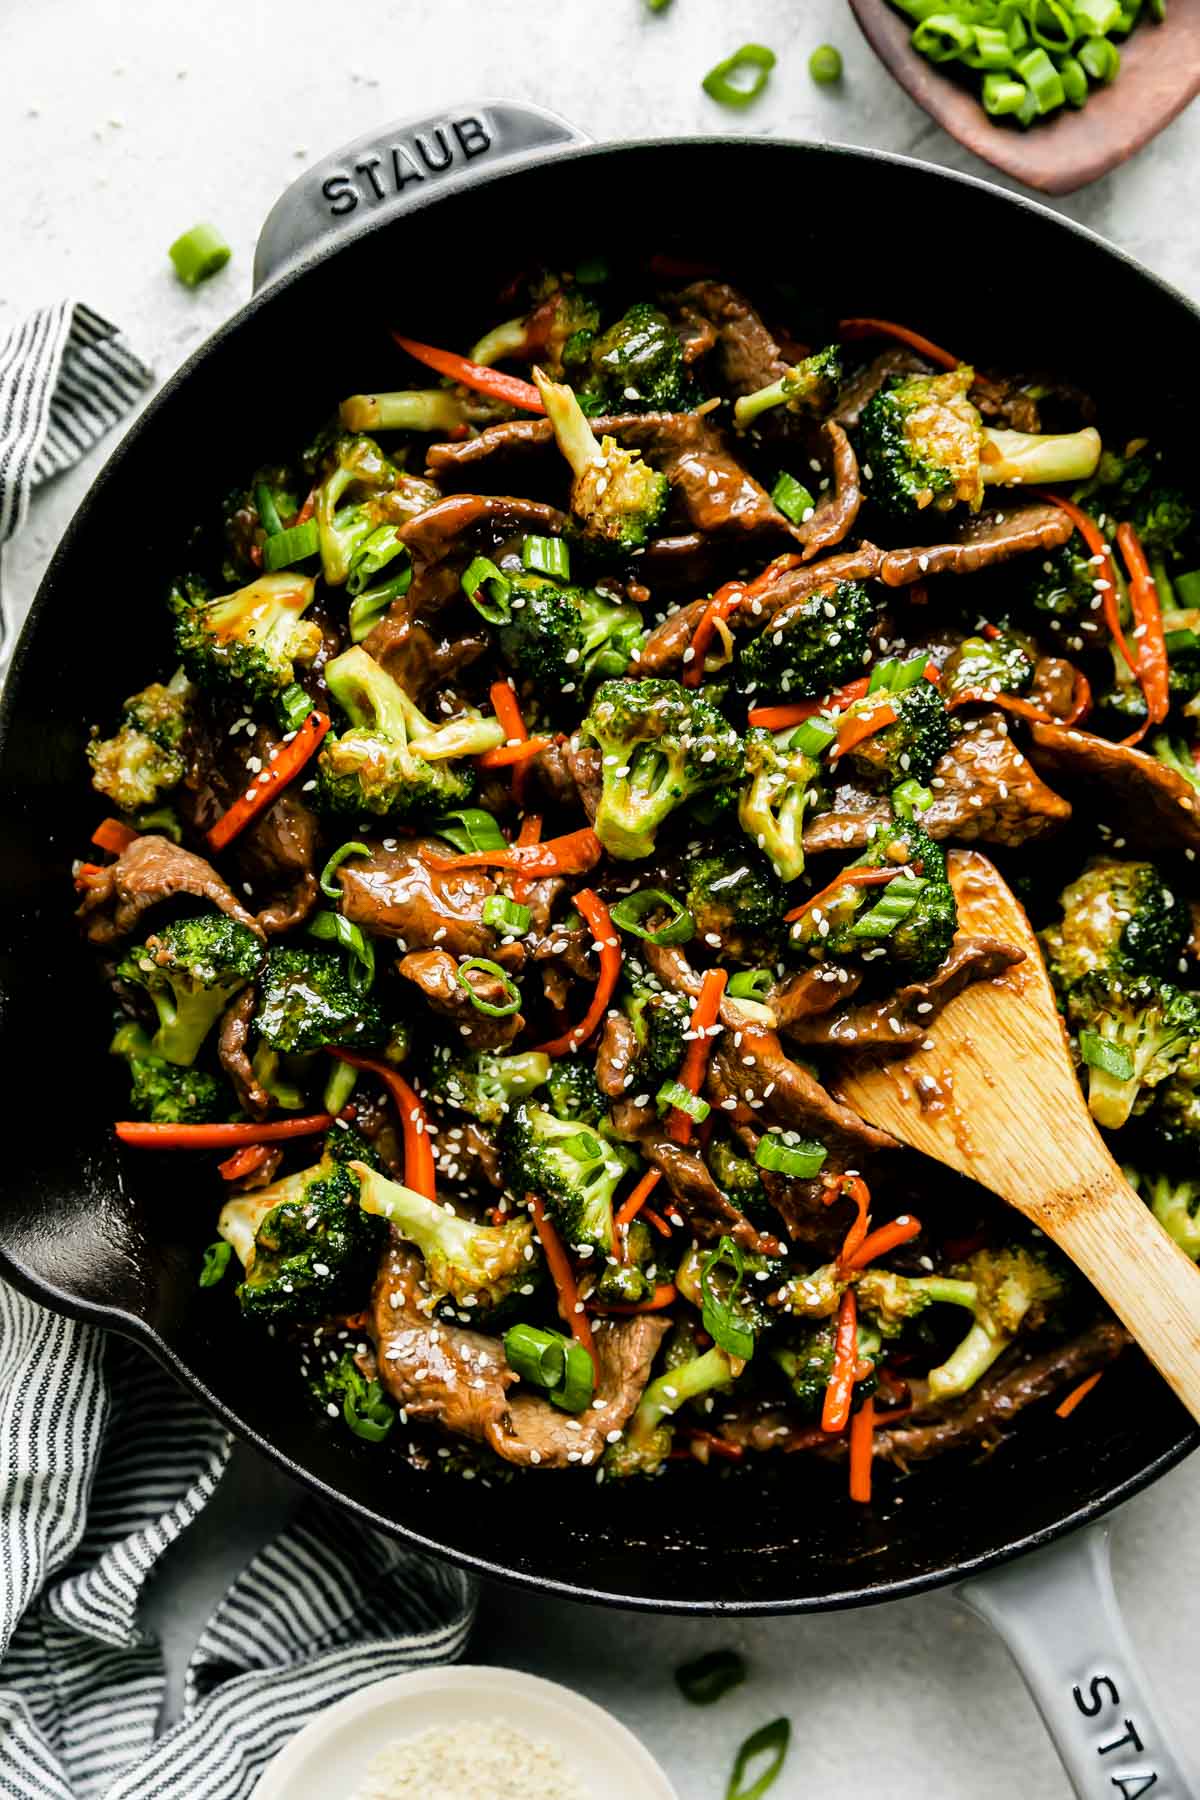 Broccoli and beef stir fry fills a large gray Staub cast iron skillet that sits atop a creamy white textured surface. A wooden spoon rests inside of the pan for stirring and the beef and broccoli stir fry is garnished with toasted sesame seeds and thinly sliced green onion. The pan is surrounded by a small wooden bowl filled with thinly sliced green onion, a blue and white striped linen napkin, and a small white plate filled with toasted sesame seeds.